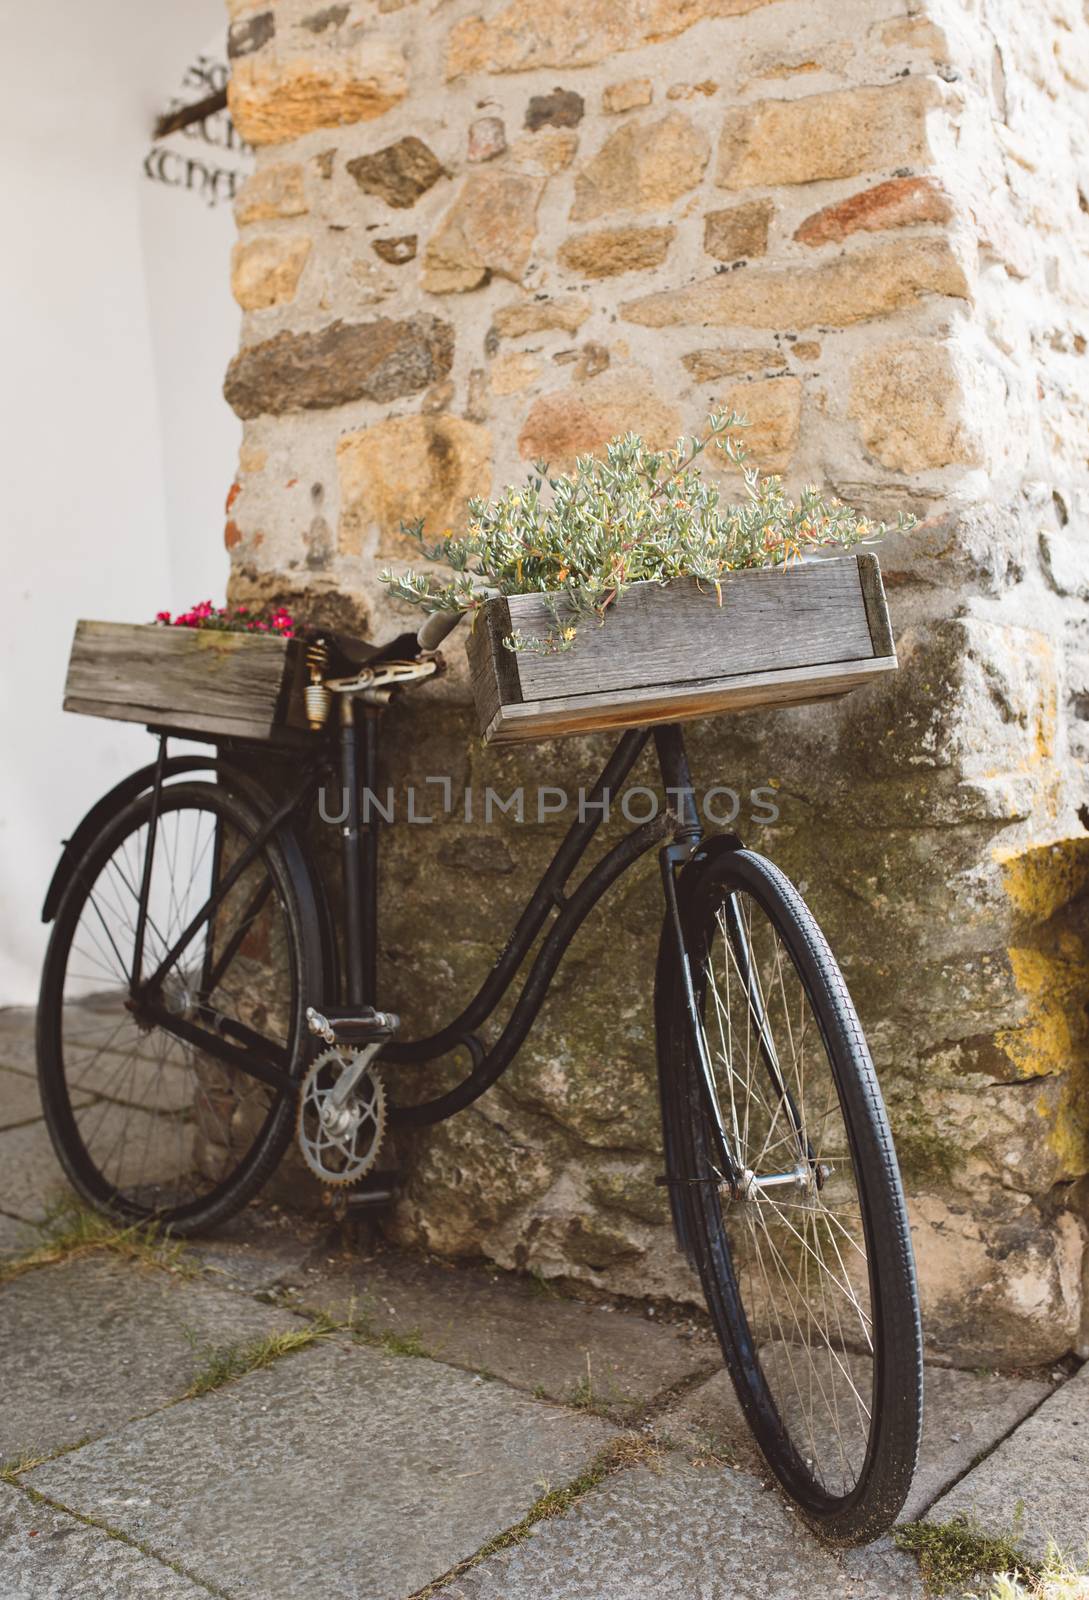 Retro style bicycle with flowers as a creative decoration near the shop in the cozy small street. Telc, Czech Republic